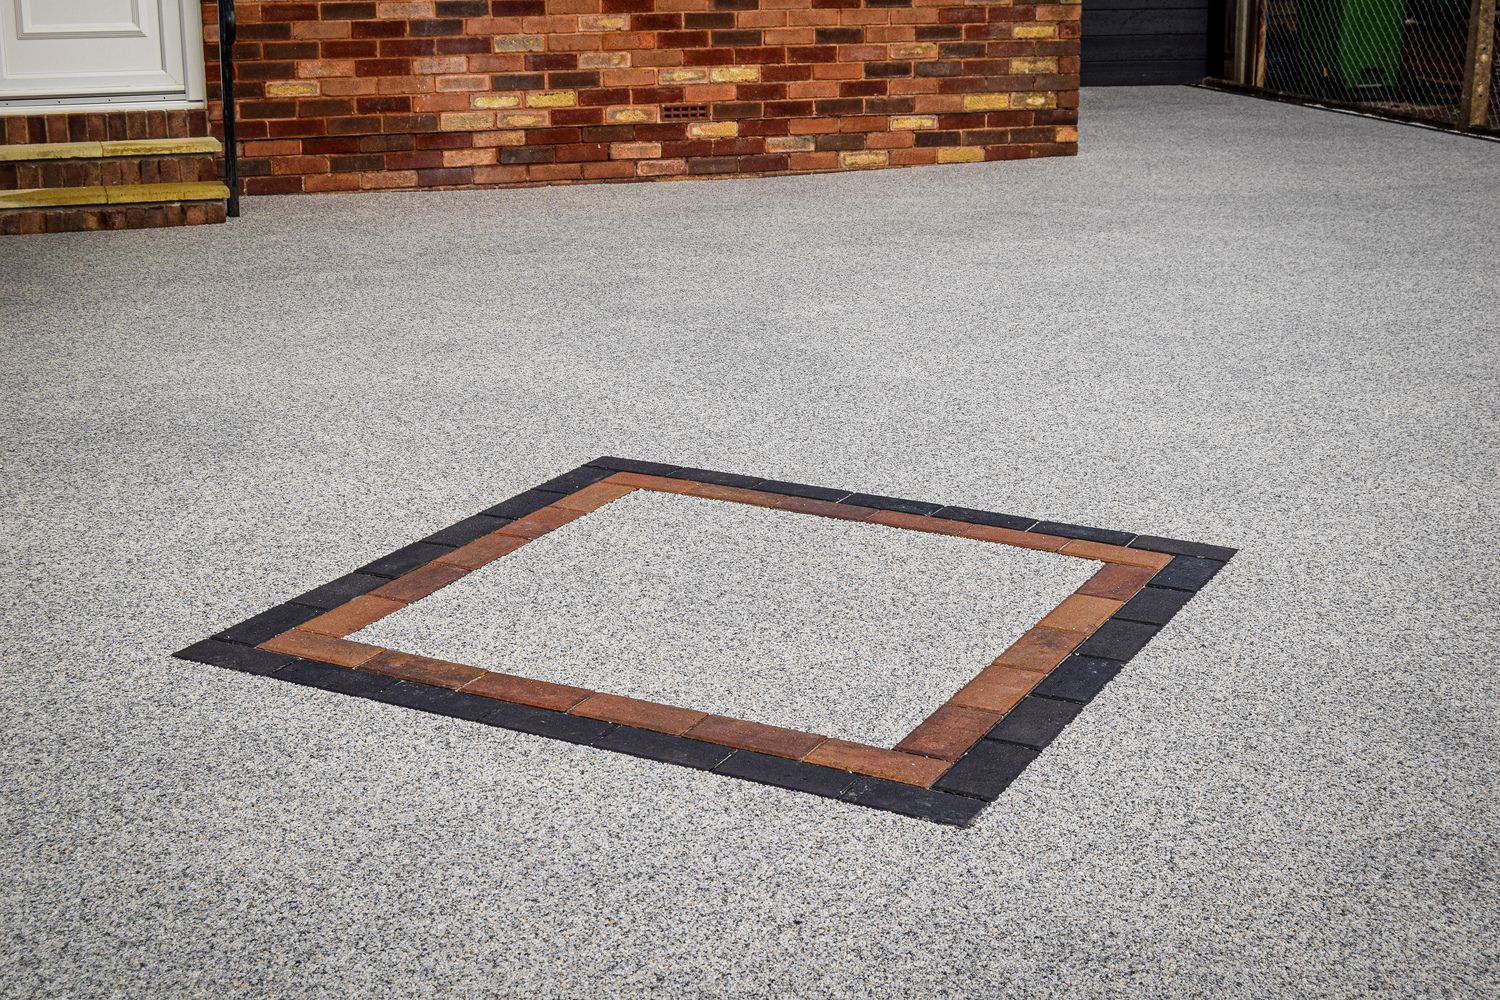 Grey resin driveways with a resin square on it, outside a red brick house.